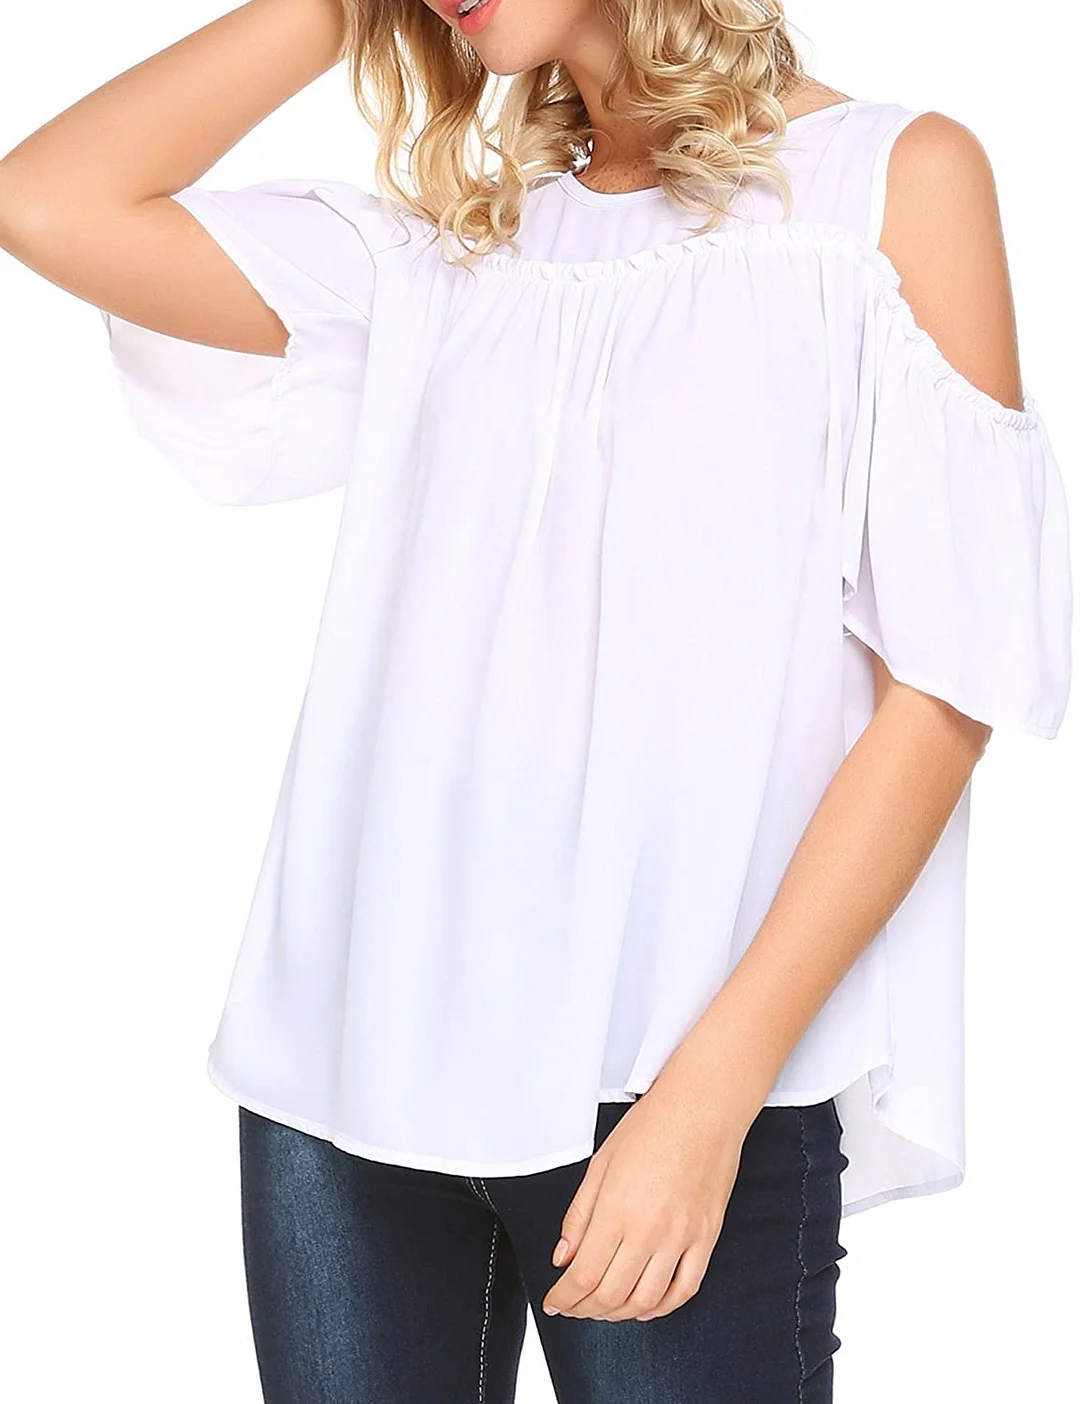 Women's Short Sleeve Casual Cold Shoulder Top Loose Blouse Tunic Tops